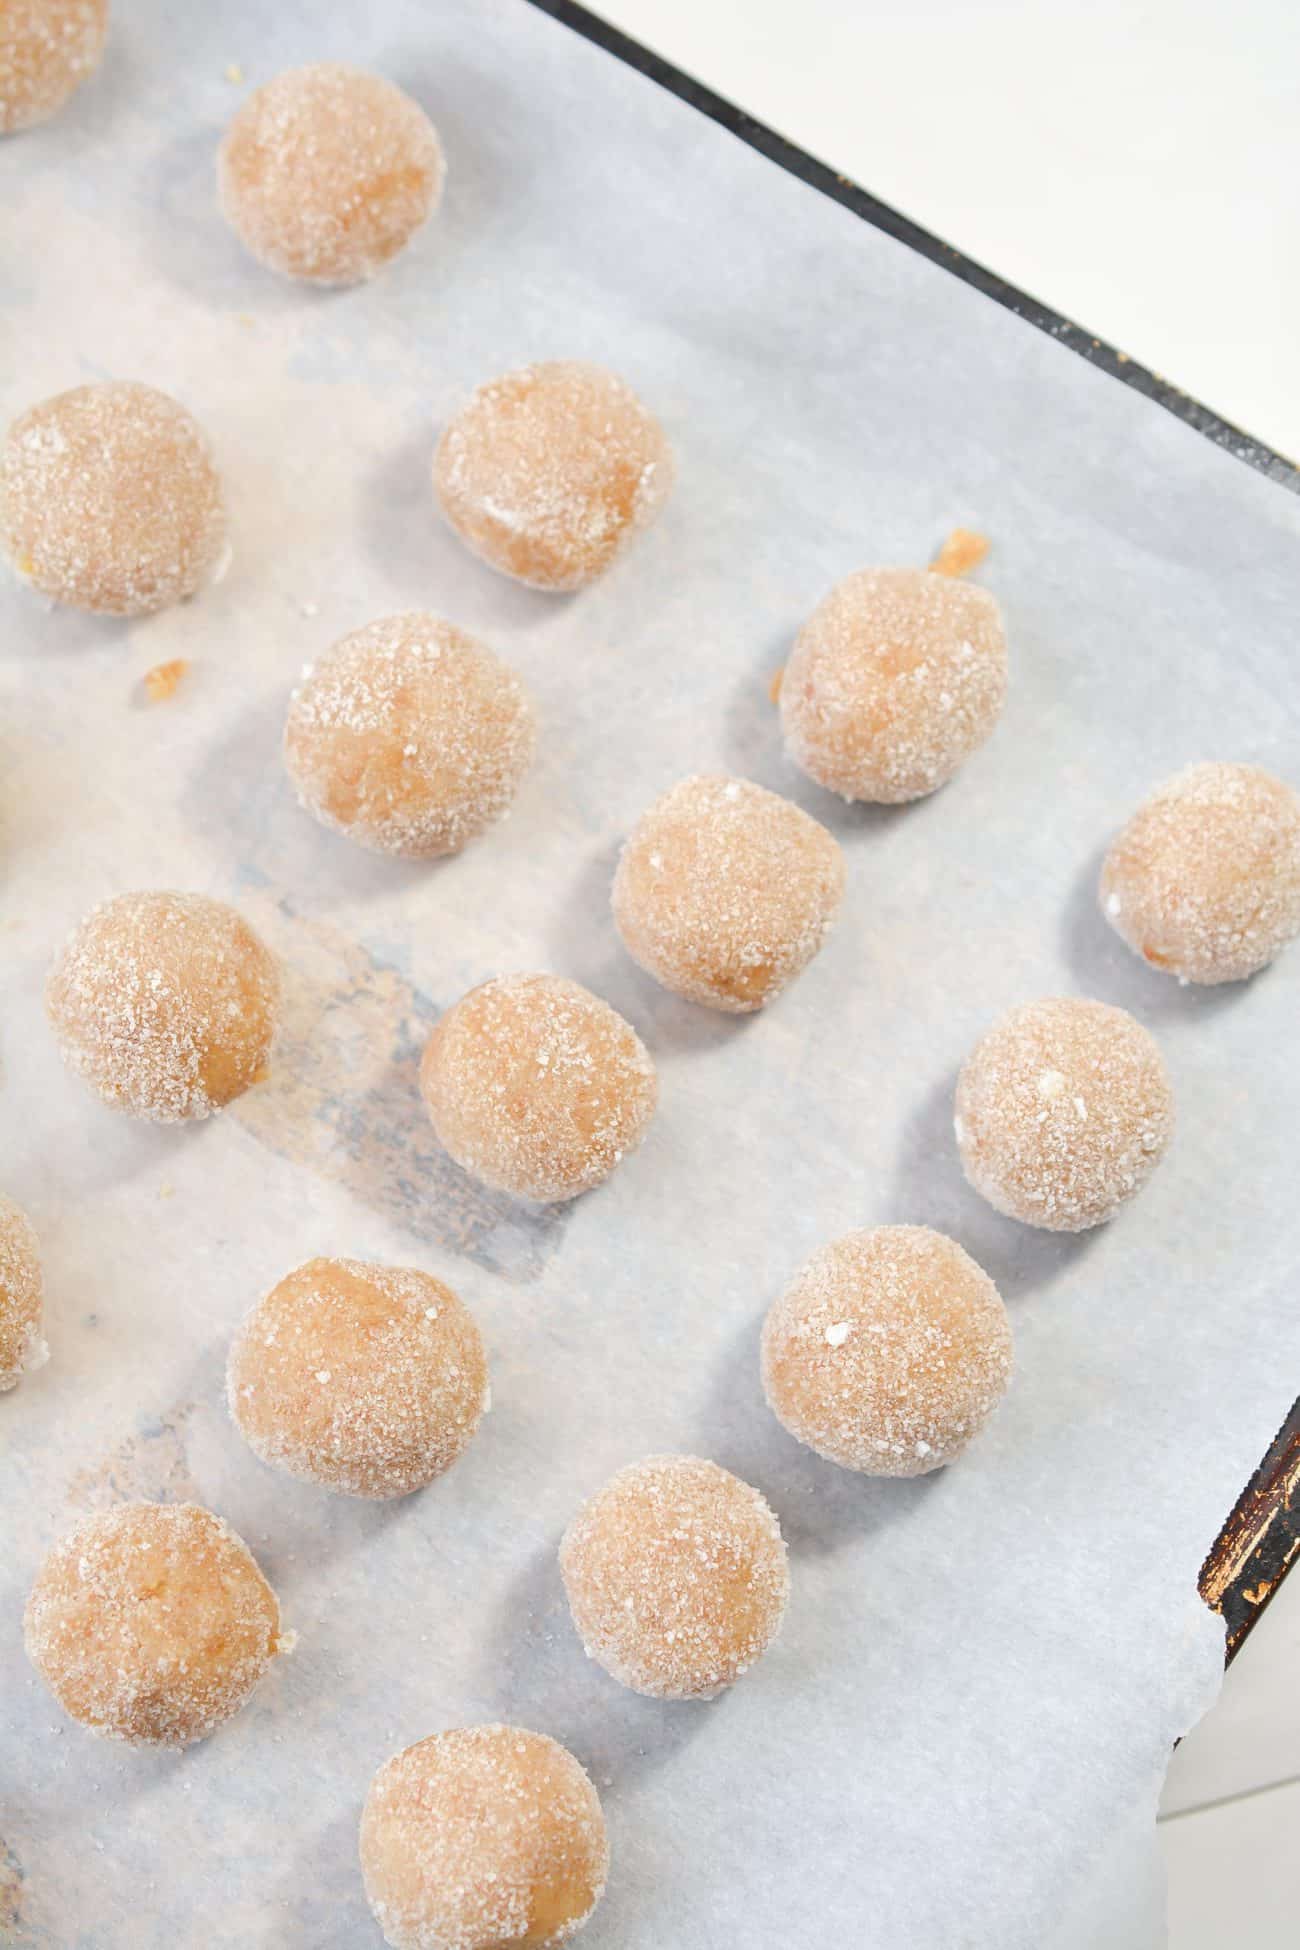 Form the dough into 3 dozen evenly sized balls and roll them to coat them in granulated sugar.